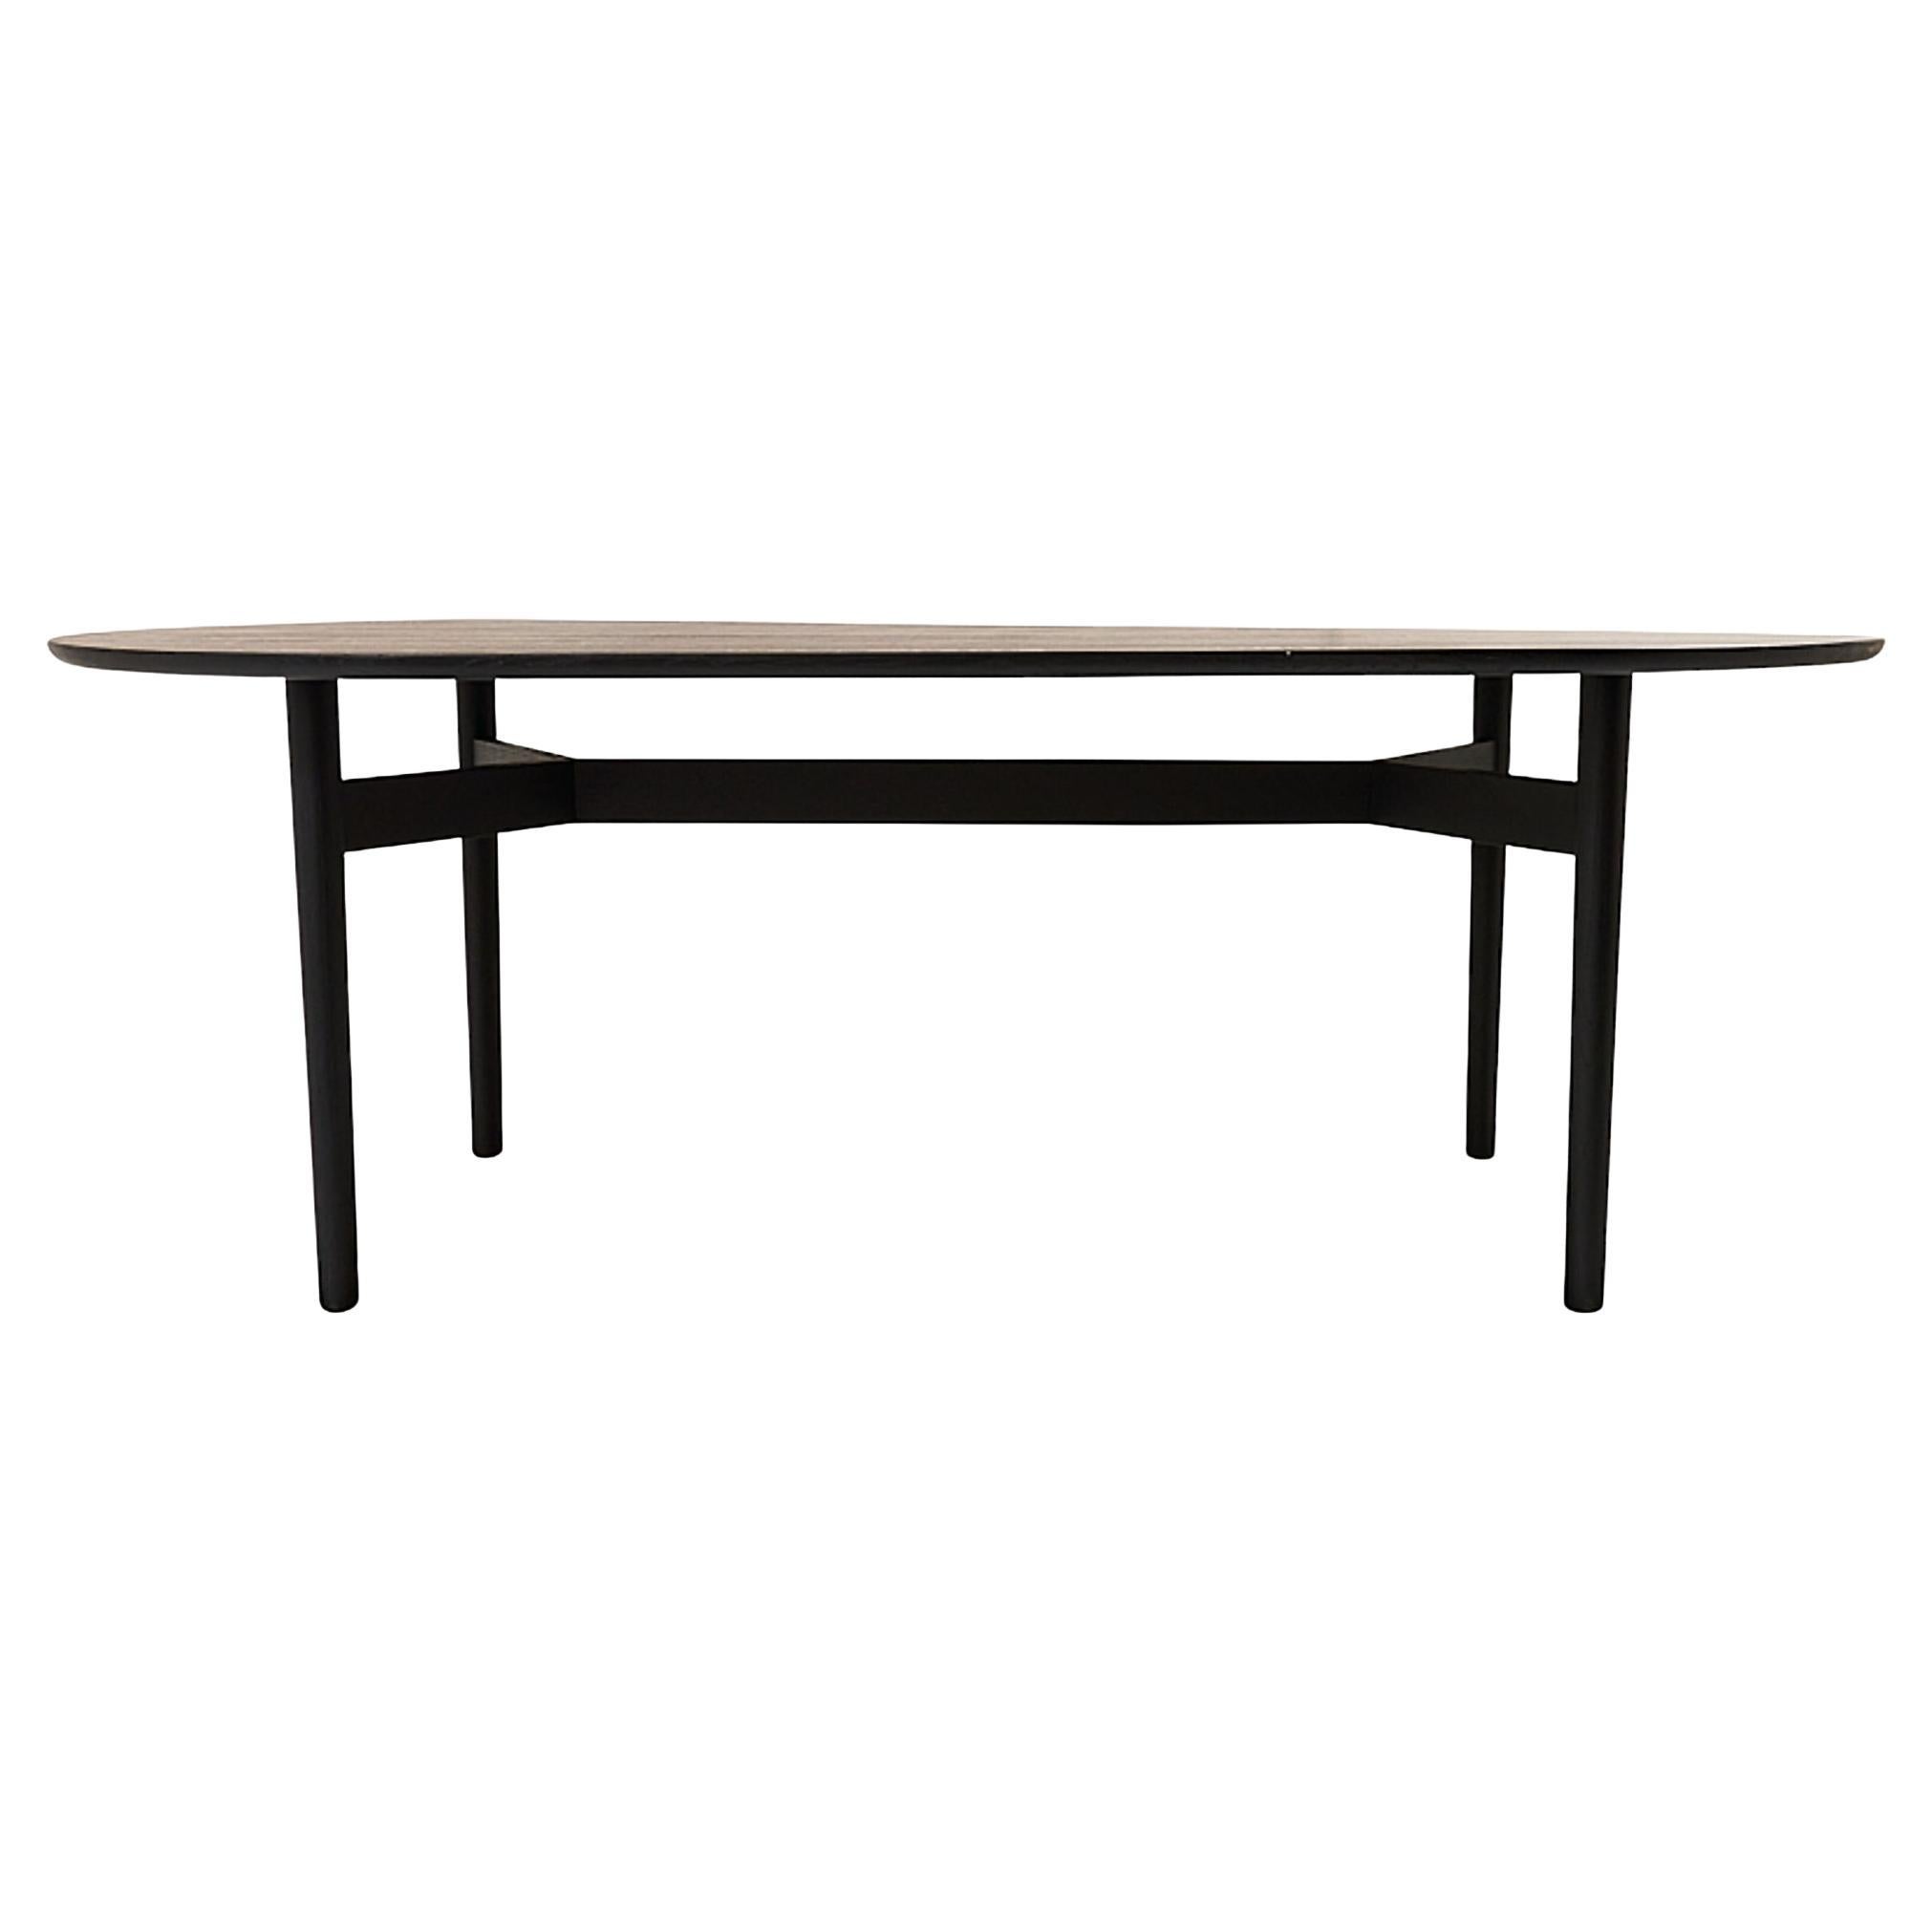 Schumacher Editions Puffin 98" Dining Table in Soft Black